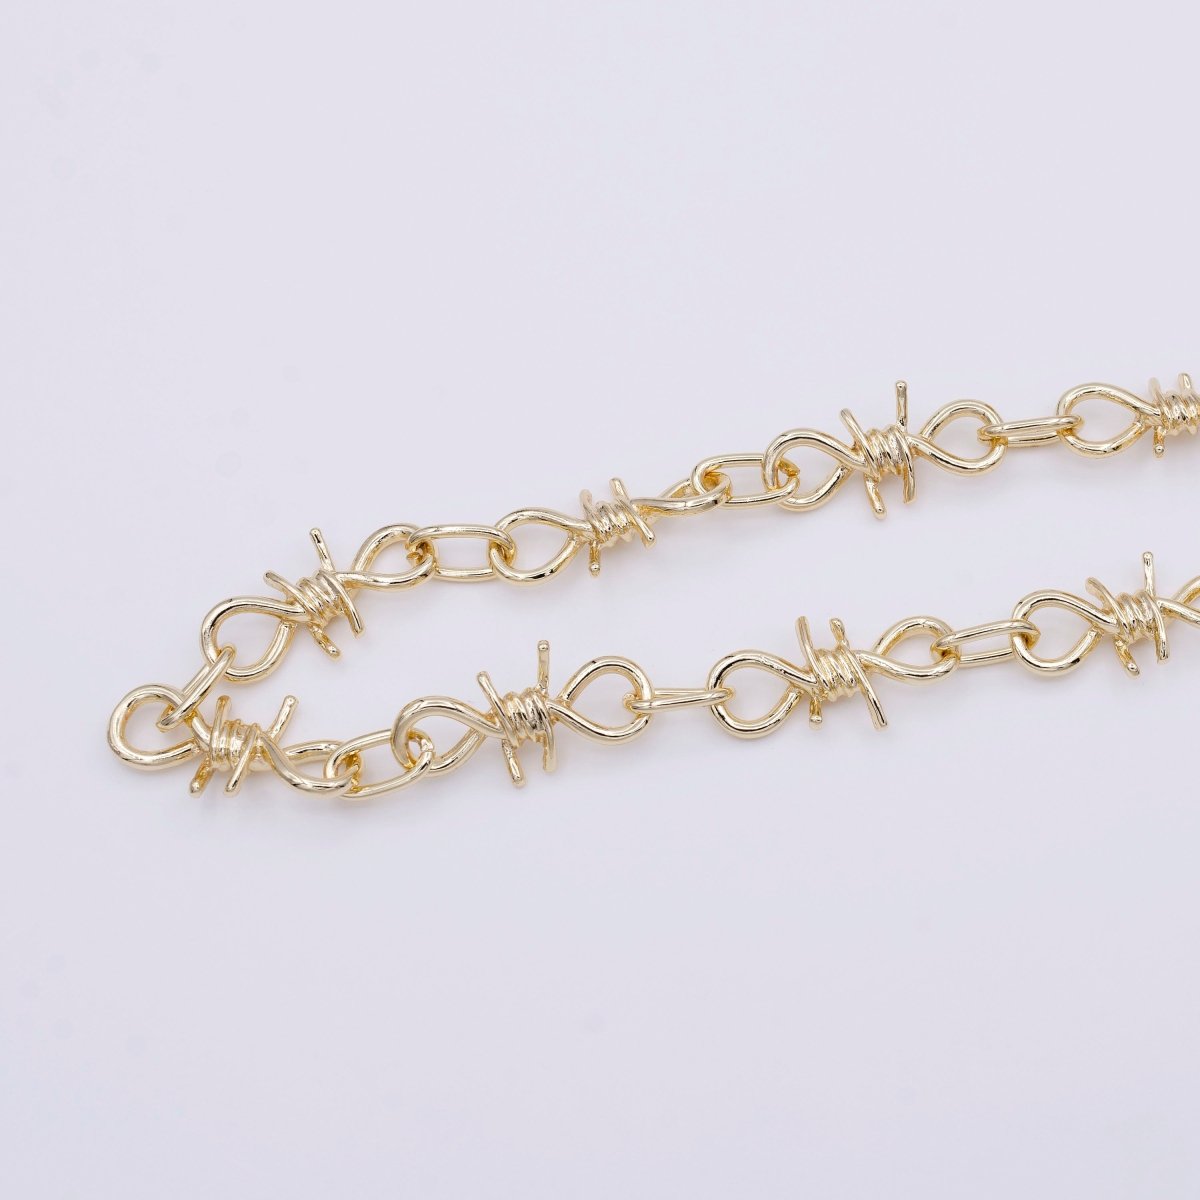 14K Gold Filled 29.3mm x 15.2mm Barbed Wire Gold Chain, Silver, Black Twist Designed Wholesale Chain (LARGE) | ROLL-957, ROLL-958, ROLL-959 Clearance Pricing - DLUXCA